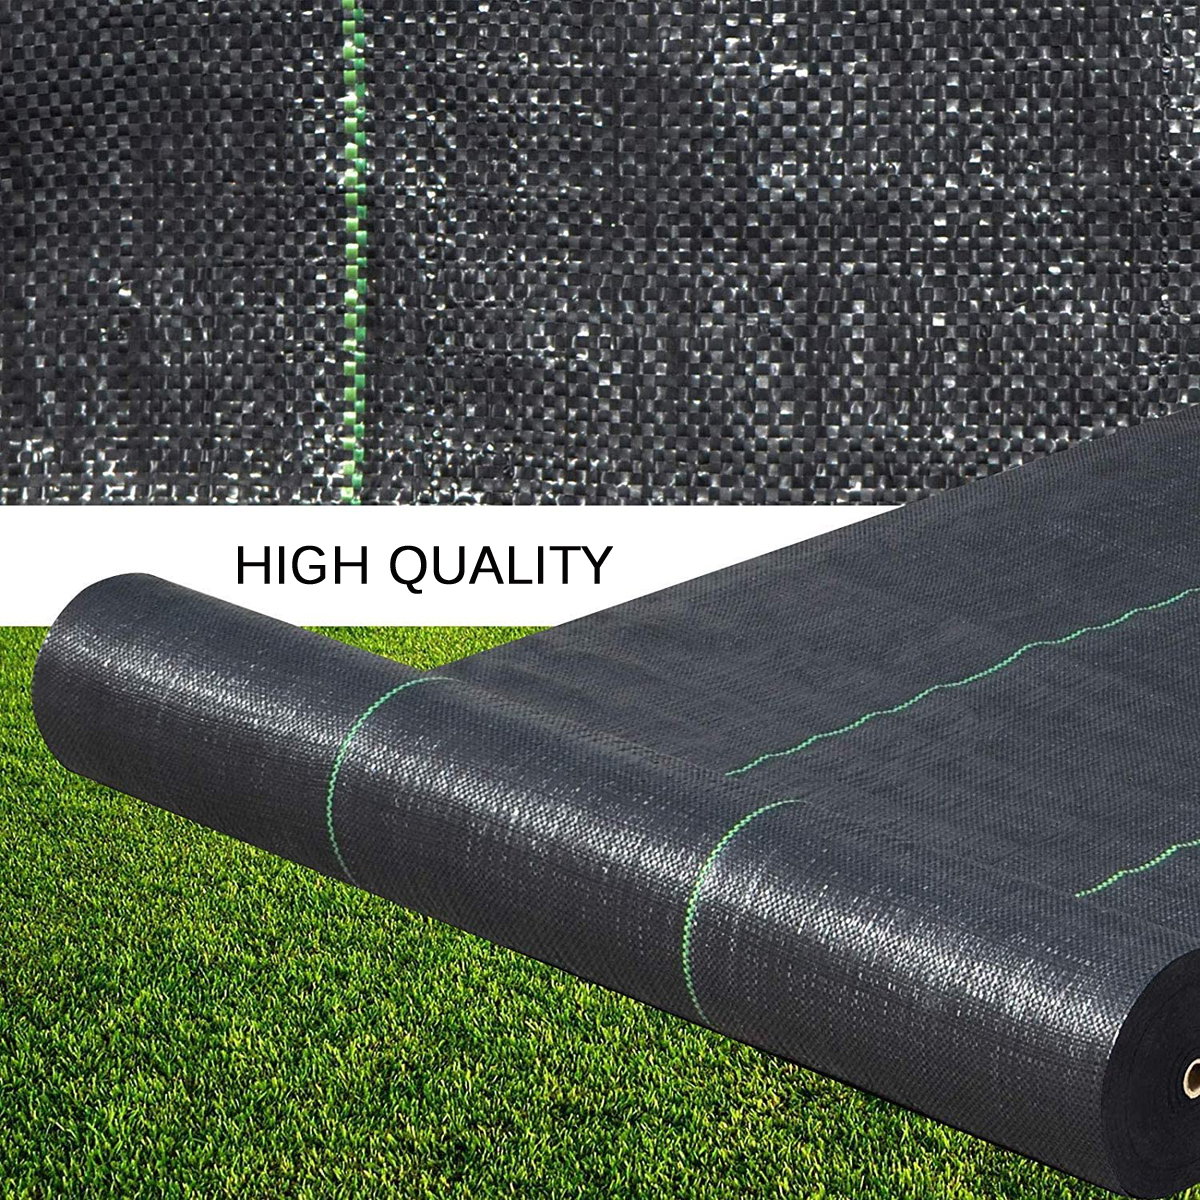 121524m-Wide-70gsm-Weed-Control-Fabric-Ground-Cover-Membrane-Garden-Landscape-1831388-3